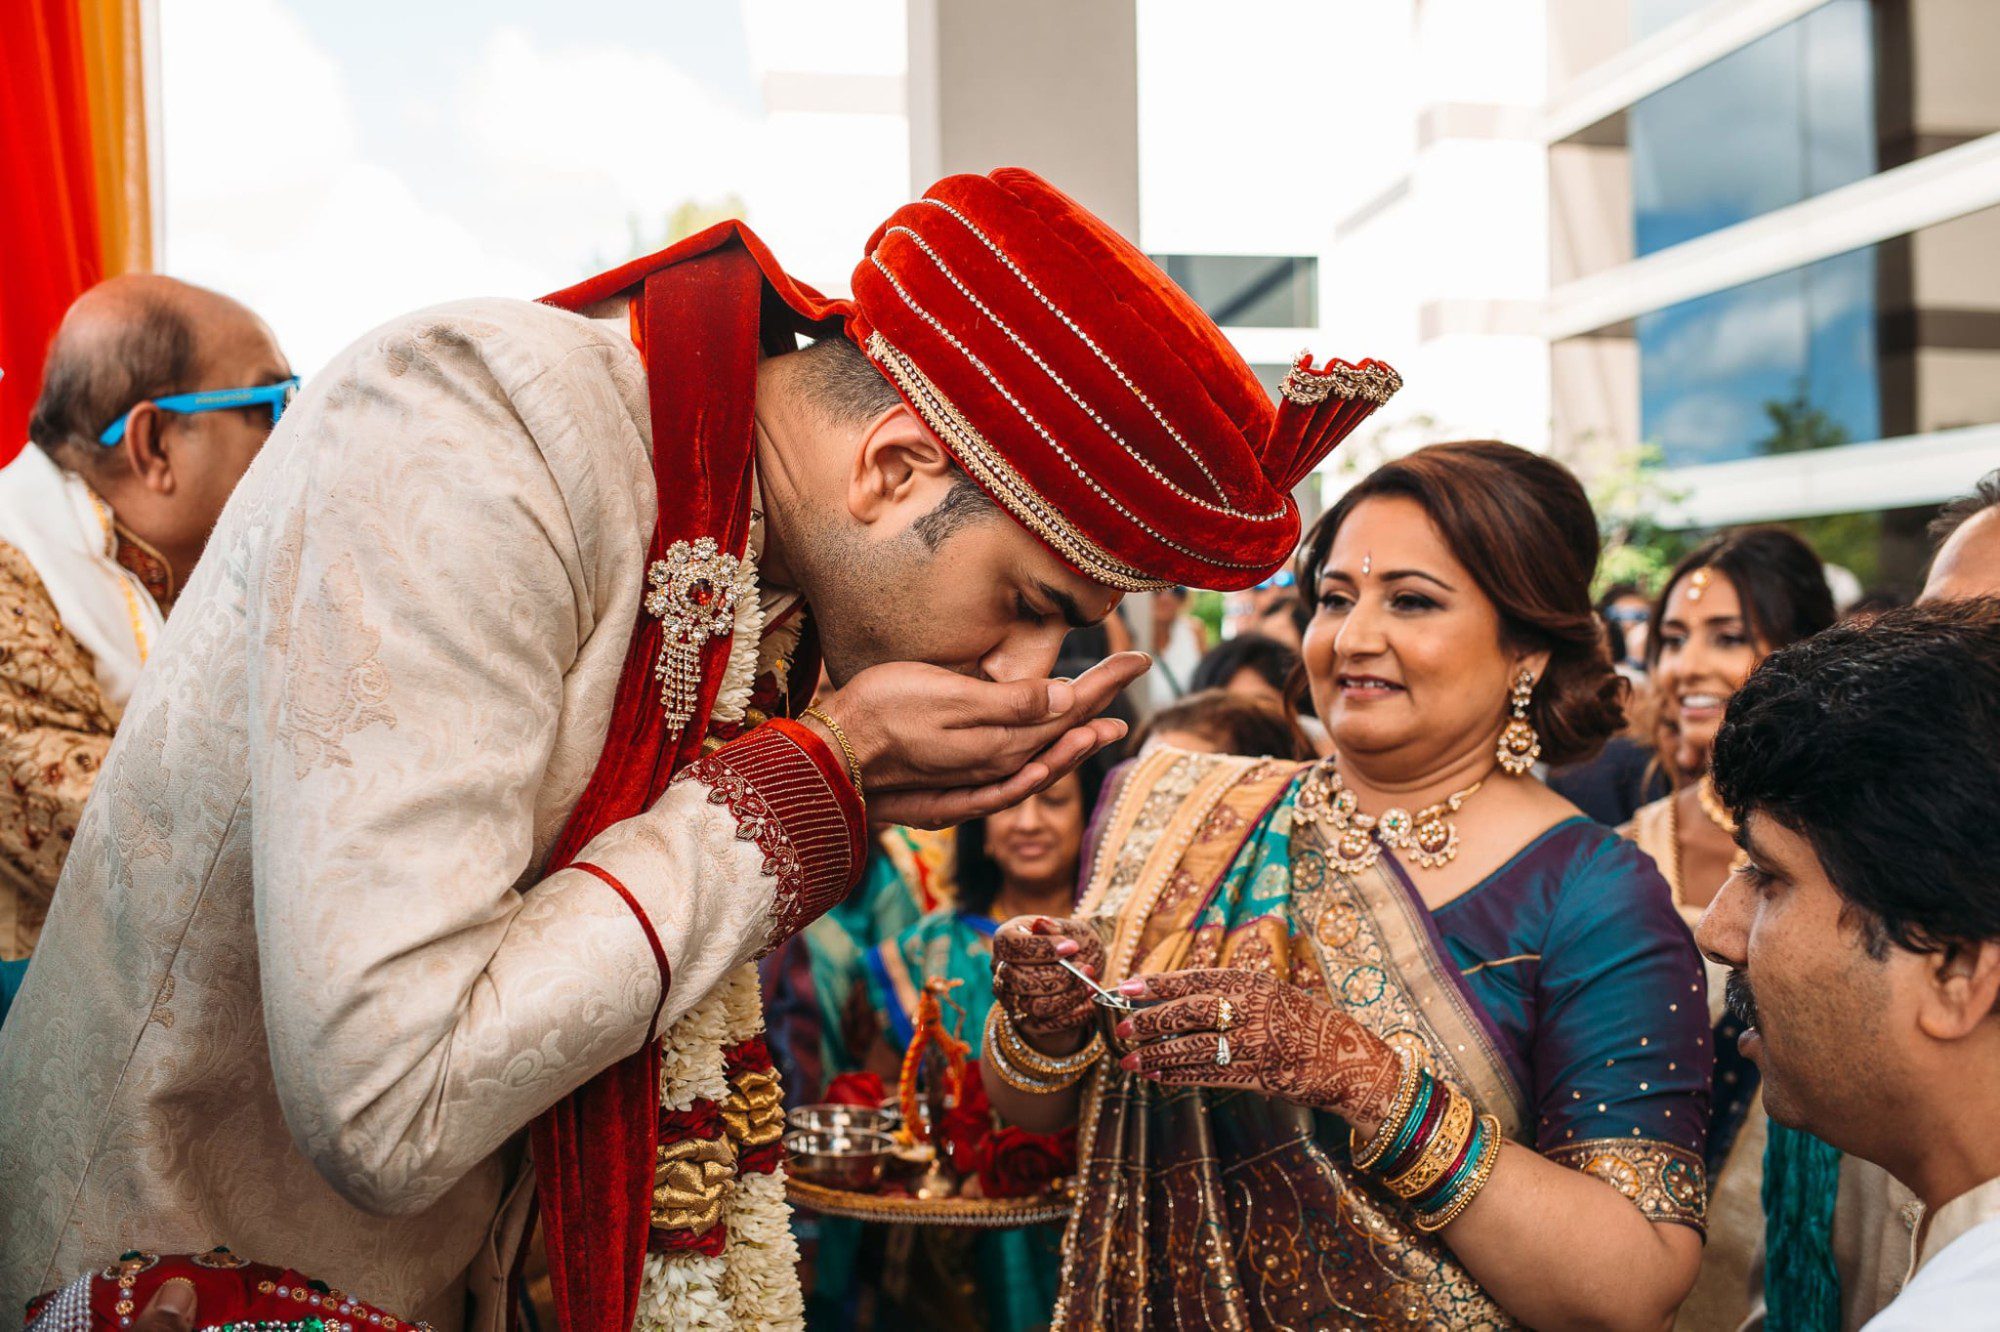 Indian groom drink water out of his hands